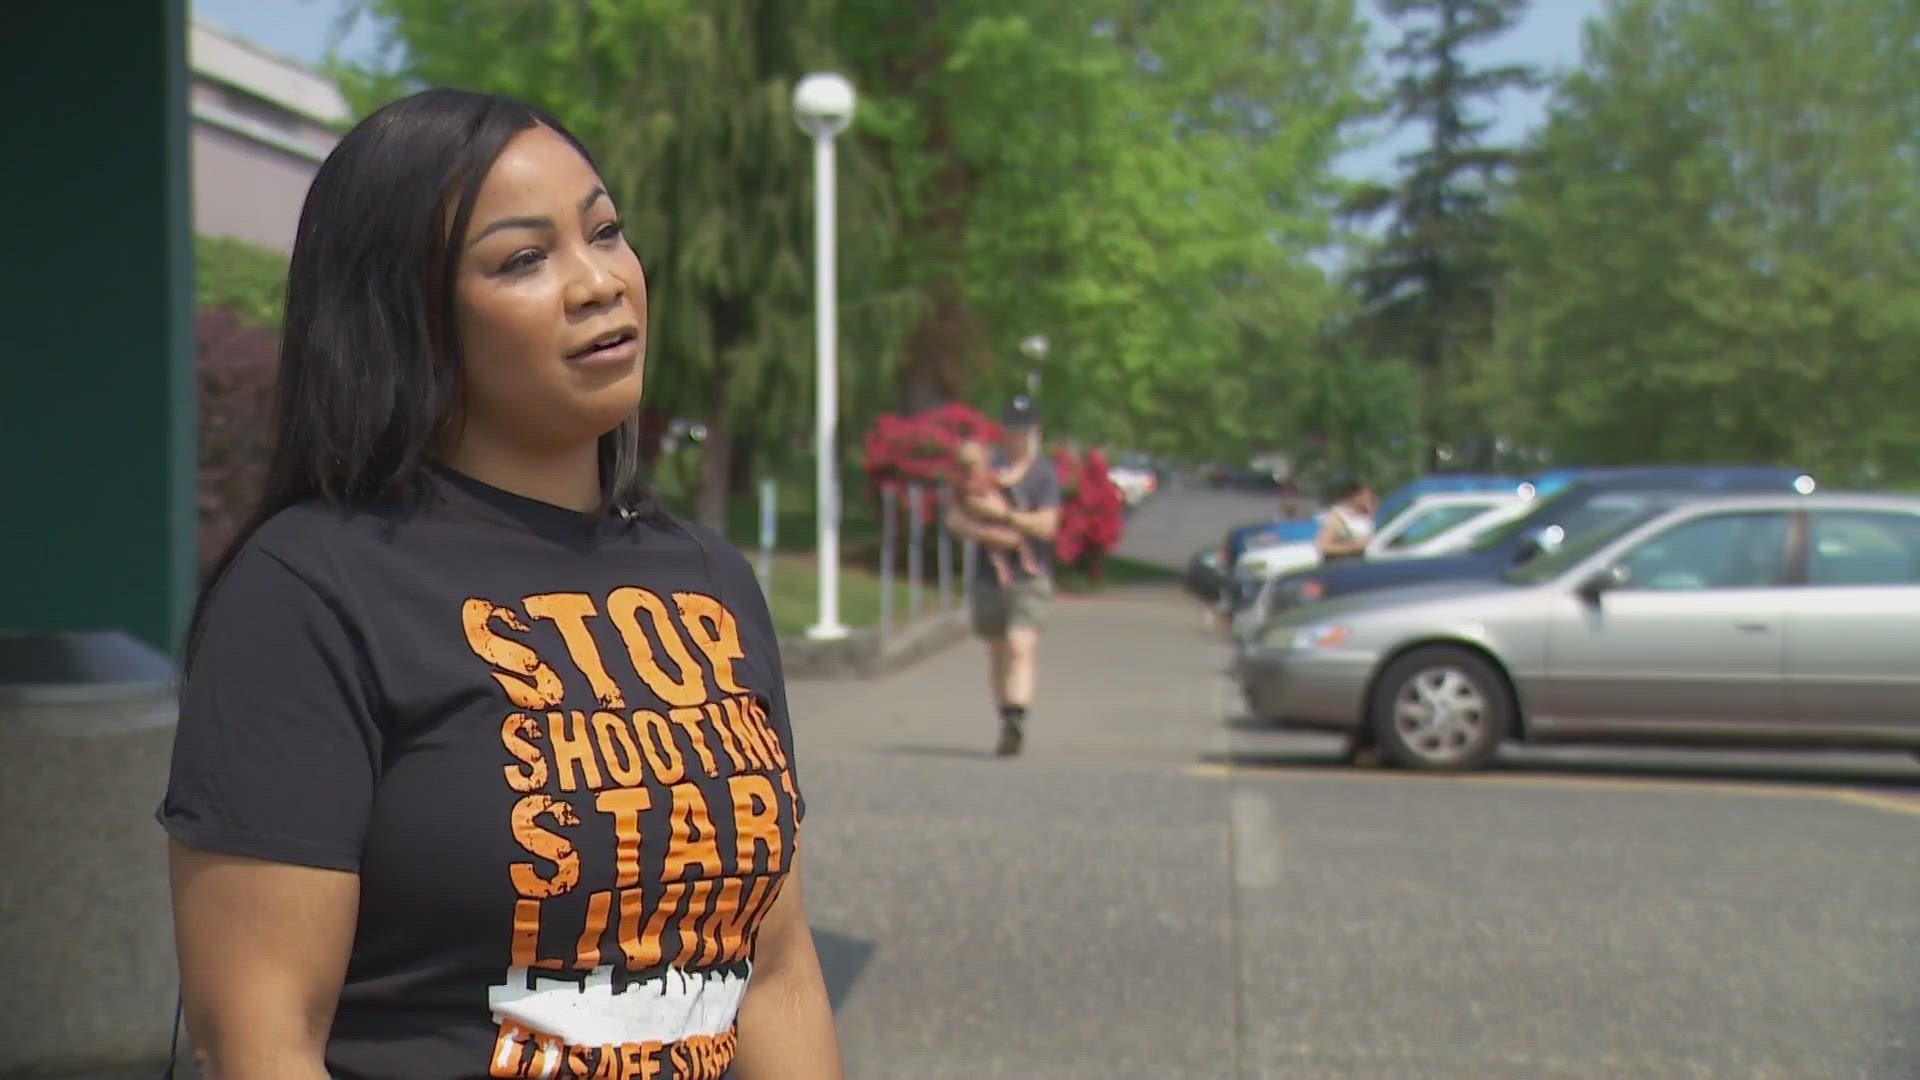 Councilmember Kiara Daniels says this is an effort to make sure Tacoma’s youth are properly served this summer.